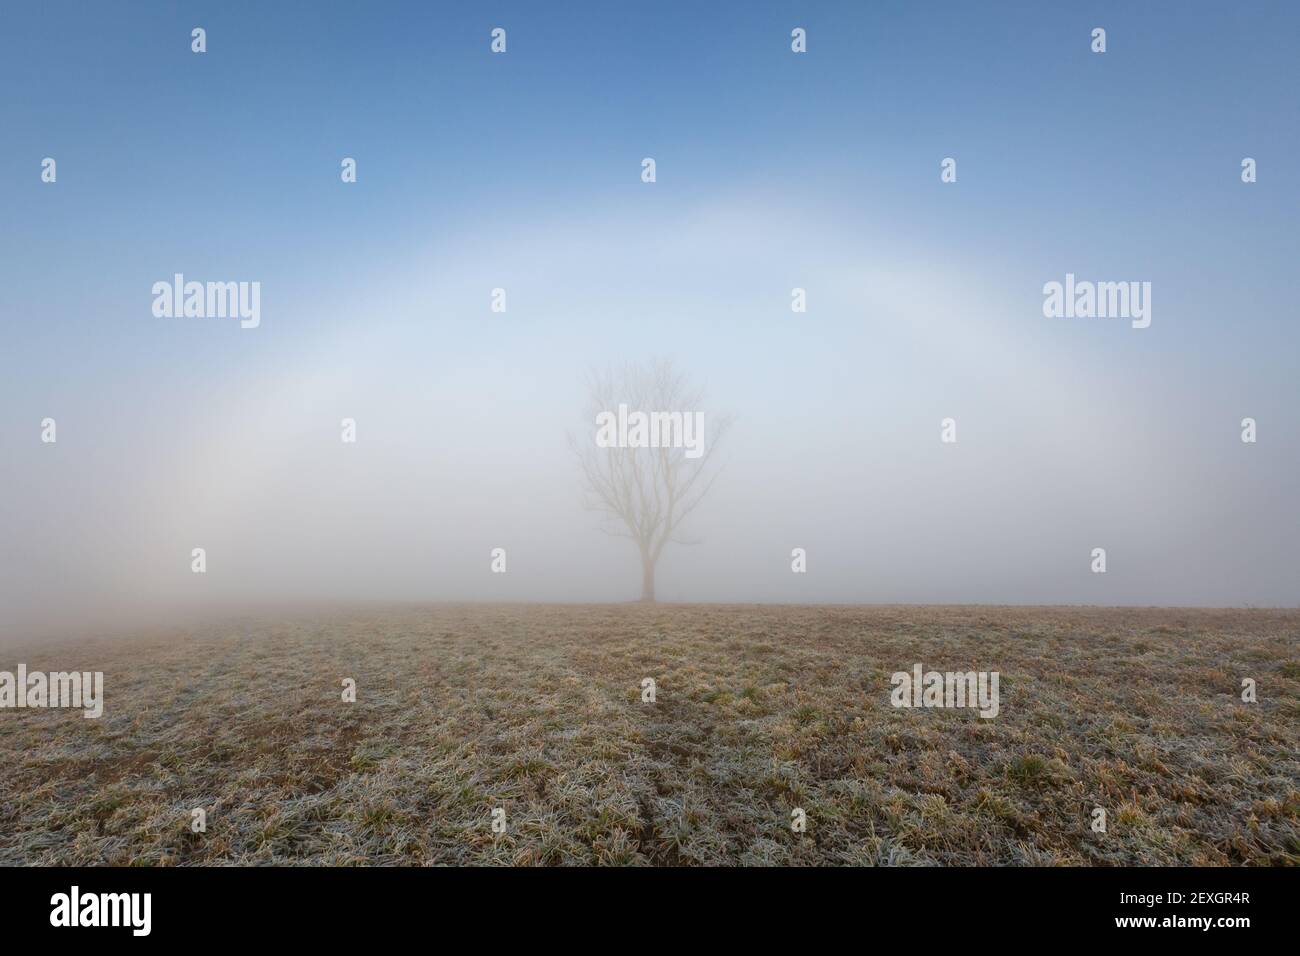 Fogbow and a tree in the rural landscape of Turiec region, Slovakia. Stock Photo